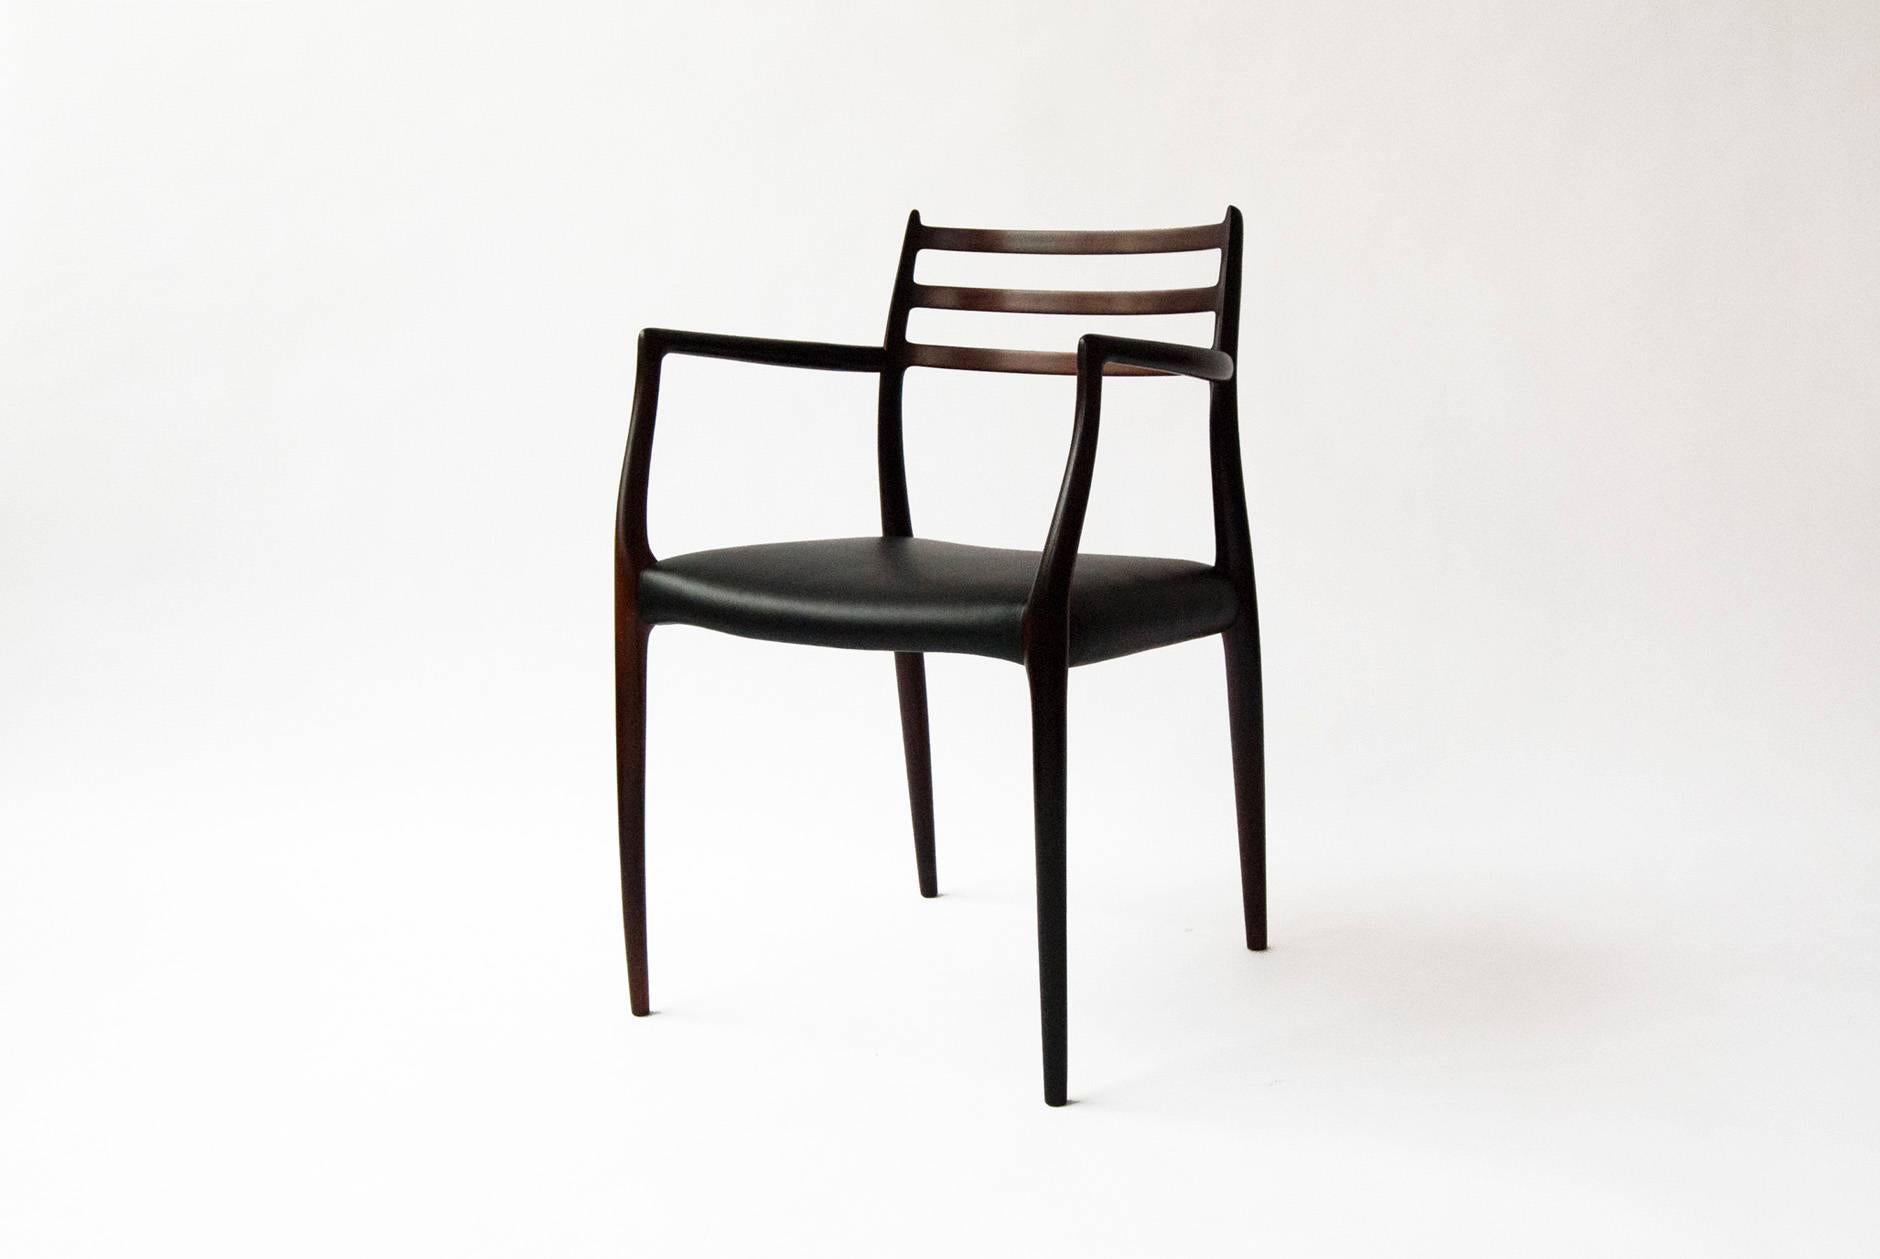 Niels O. Moller model 62 armchair. Solid Brazilian rosewood armchair. Produced by J.L Moller Mobelfabrik, 1962. Seat upholstered in new black leather.